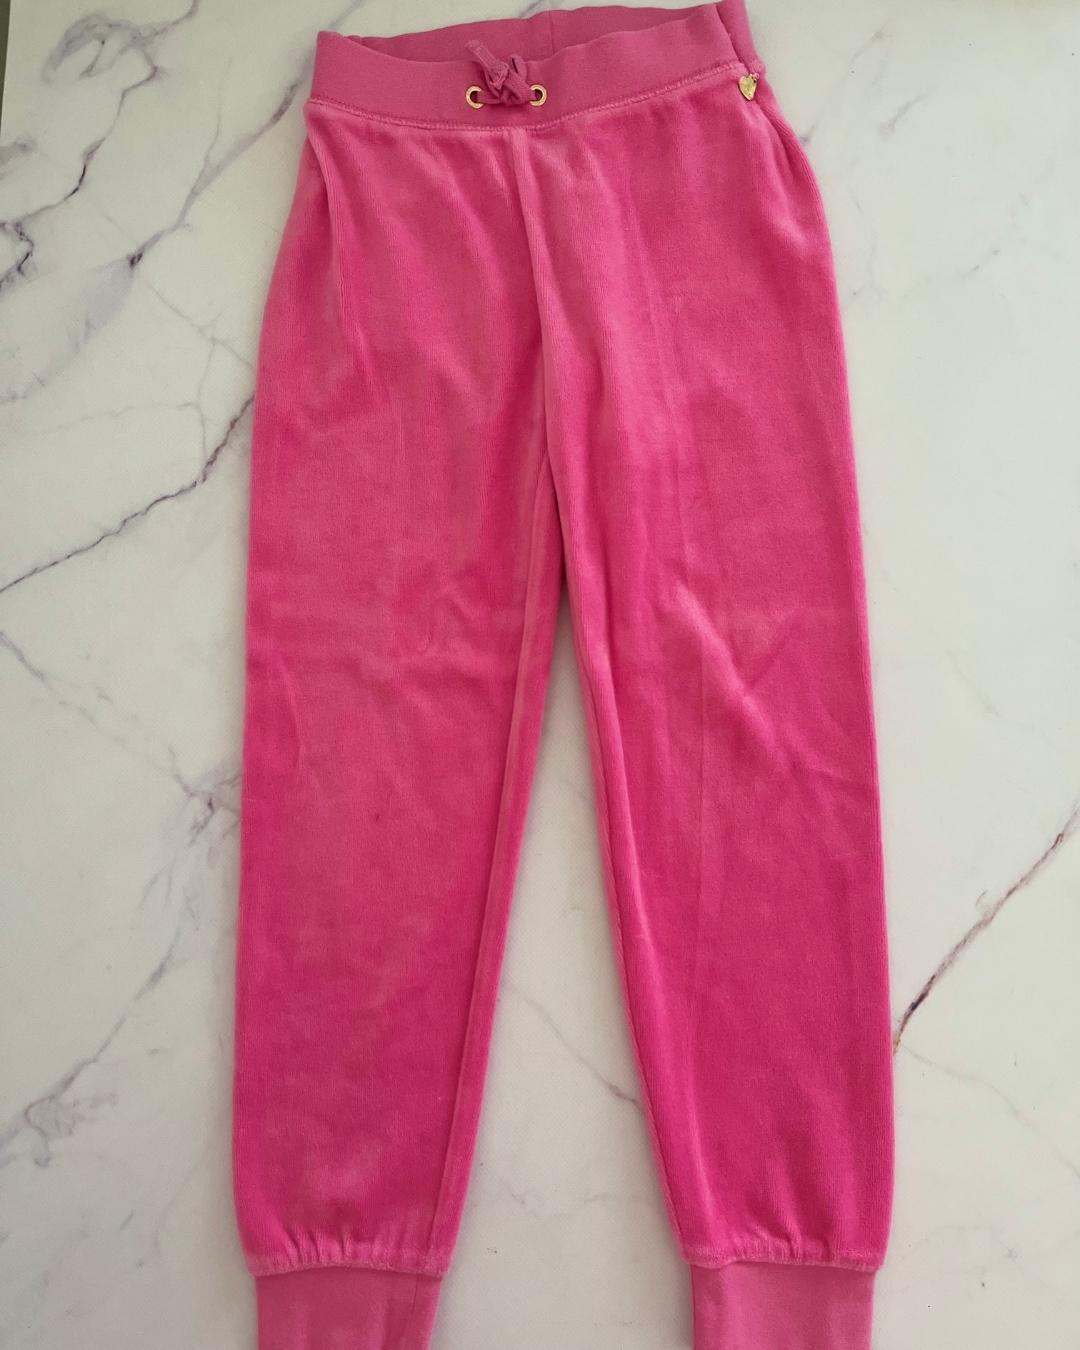 Juicy Couture pink fleece pants 6/7Y – Nearly New Kids